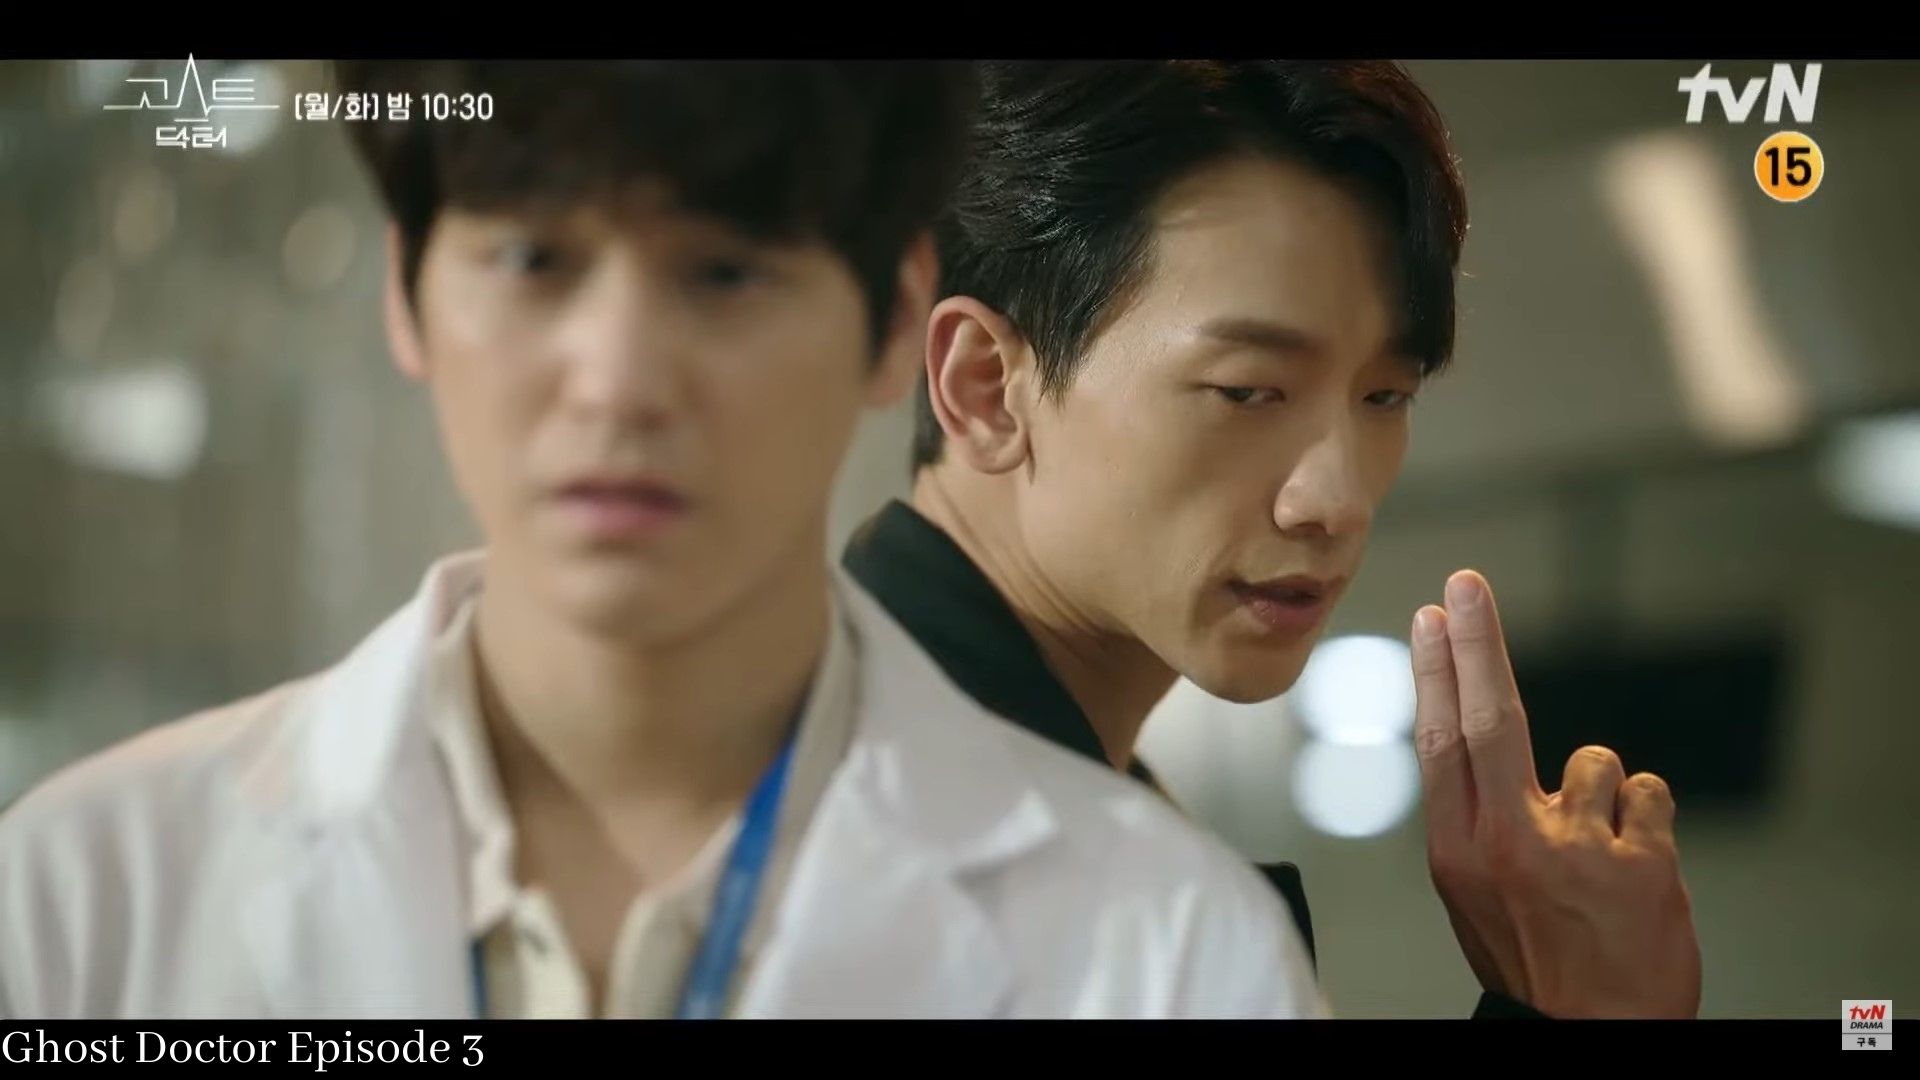 ‘Ghost Doctor Episode 3’: The Mystery Behind Chairman’s Surgery